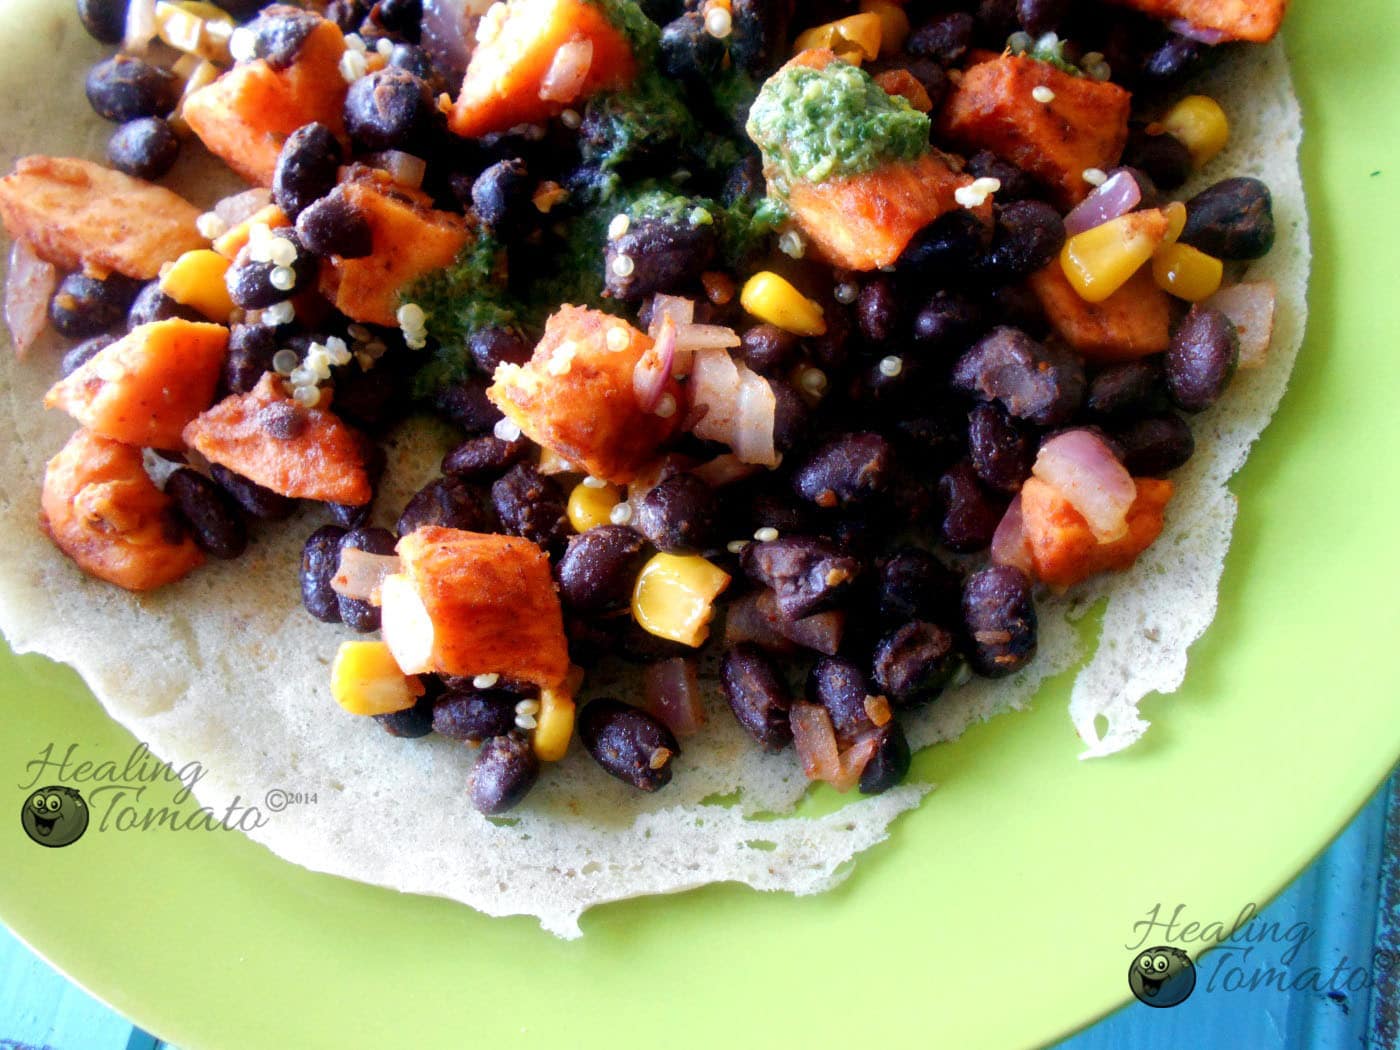 Mexican Crepe Tacos that are vegan and gluten-free. Made with Sweet potatoes, black beans and coriander chutney